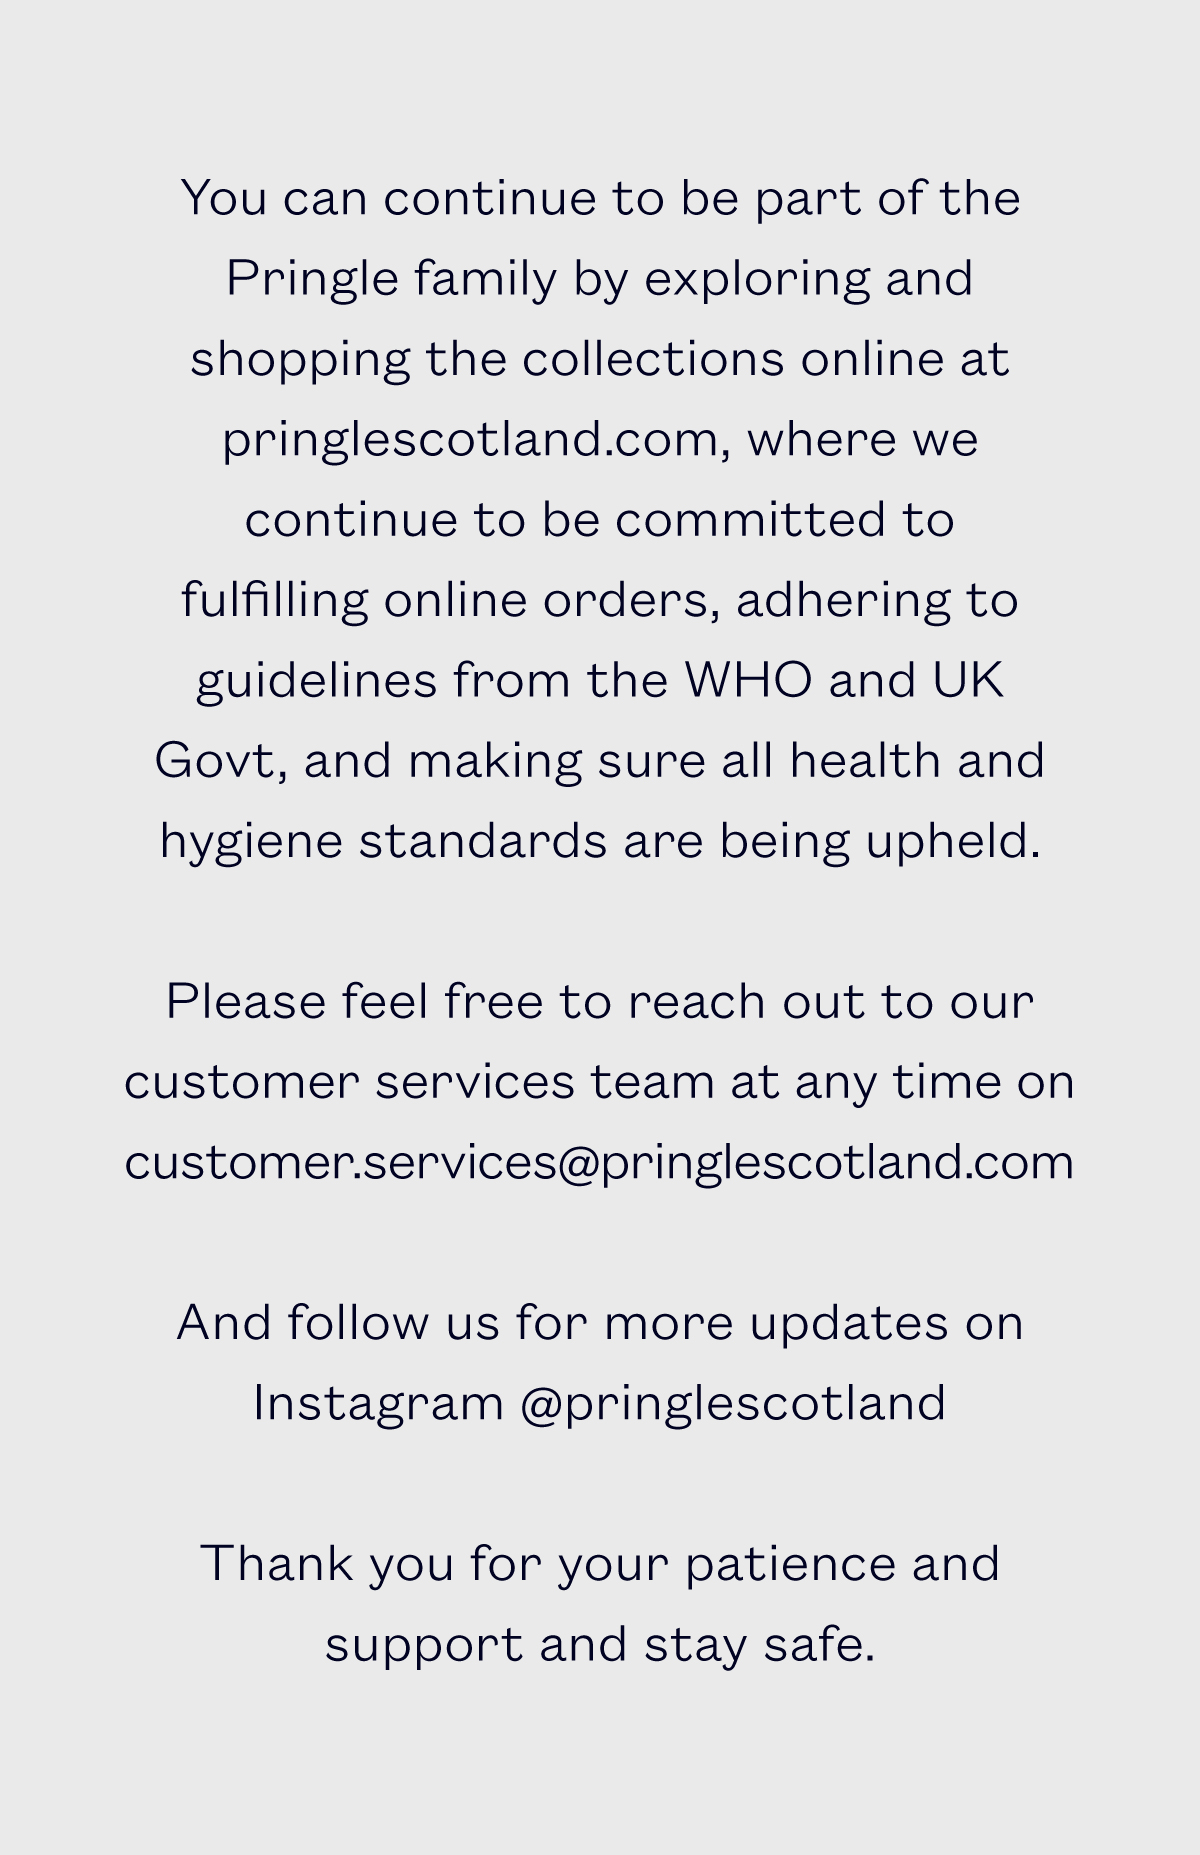 You can continue to be part of the Pringle family by exploring and shopping the collections online at pringlescotland.com, where we continue to be committed to fulfilling online orders, adhering to guidelines from the WHO and UK Govt, and making sure all health and hygiene standards are being upheld.   Please feel free to reach out to our customer services team at any time on customer.services@pringlescotland.com   And follow us for more updates on Instagram @pringlescotland    Thank you for your patience and support and stay safe.